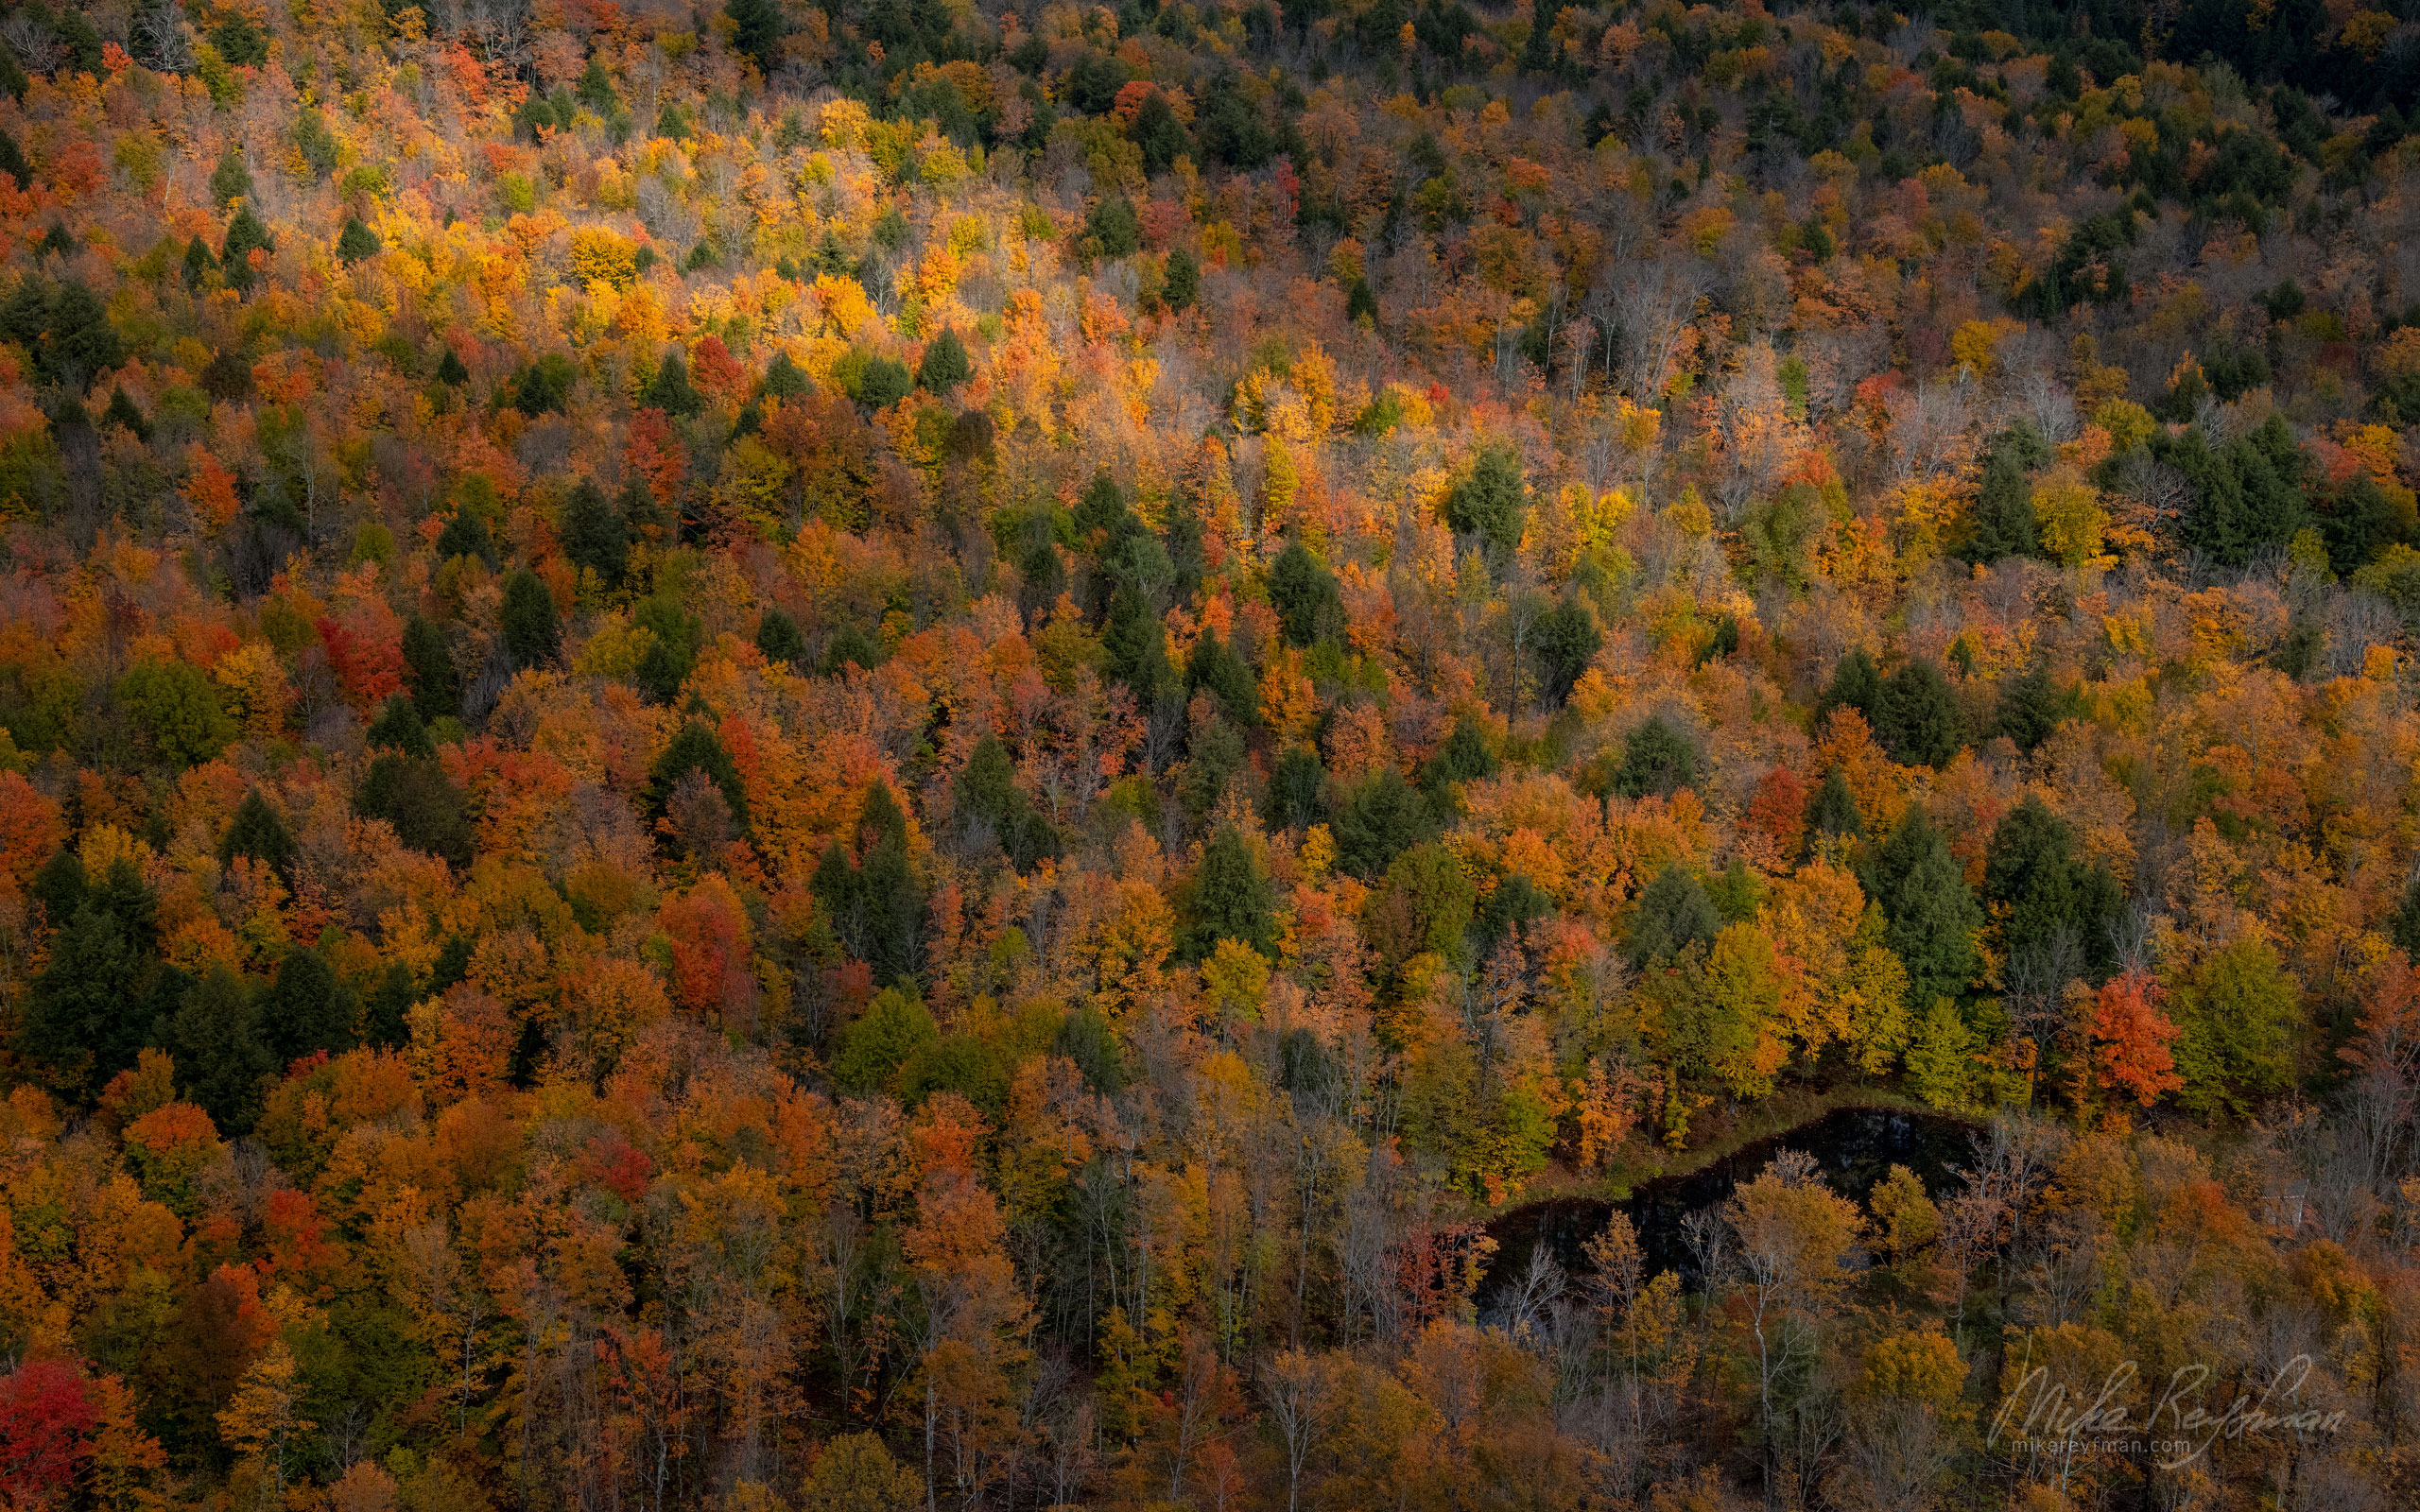 Bird-eye view from the top of Copper Peak Ski Jump. Ottava National Forest, Upper Peninsula, Michigan, USA UP-MI_092_50E3301.jpg - Michigan's Upper Peninsula - the best destination in US for fall colors. - Mike Reyfman Photography